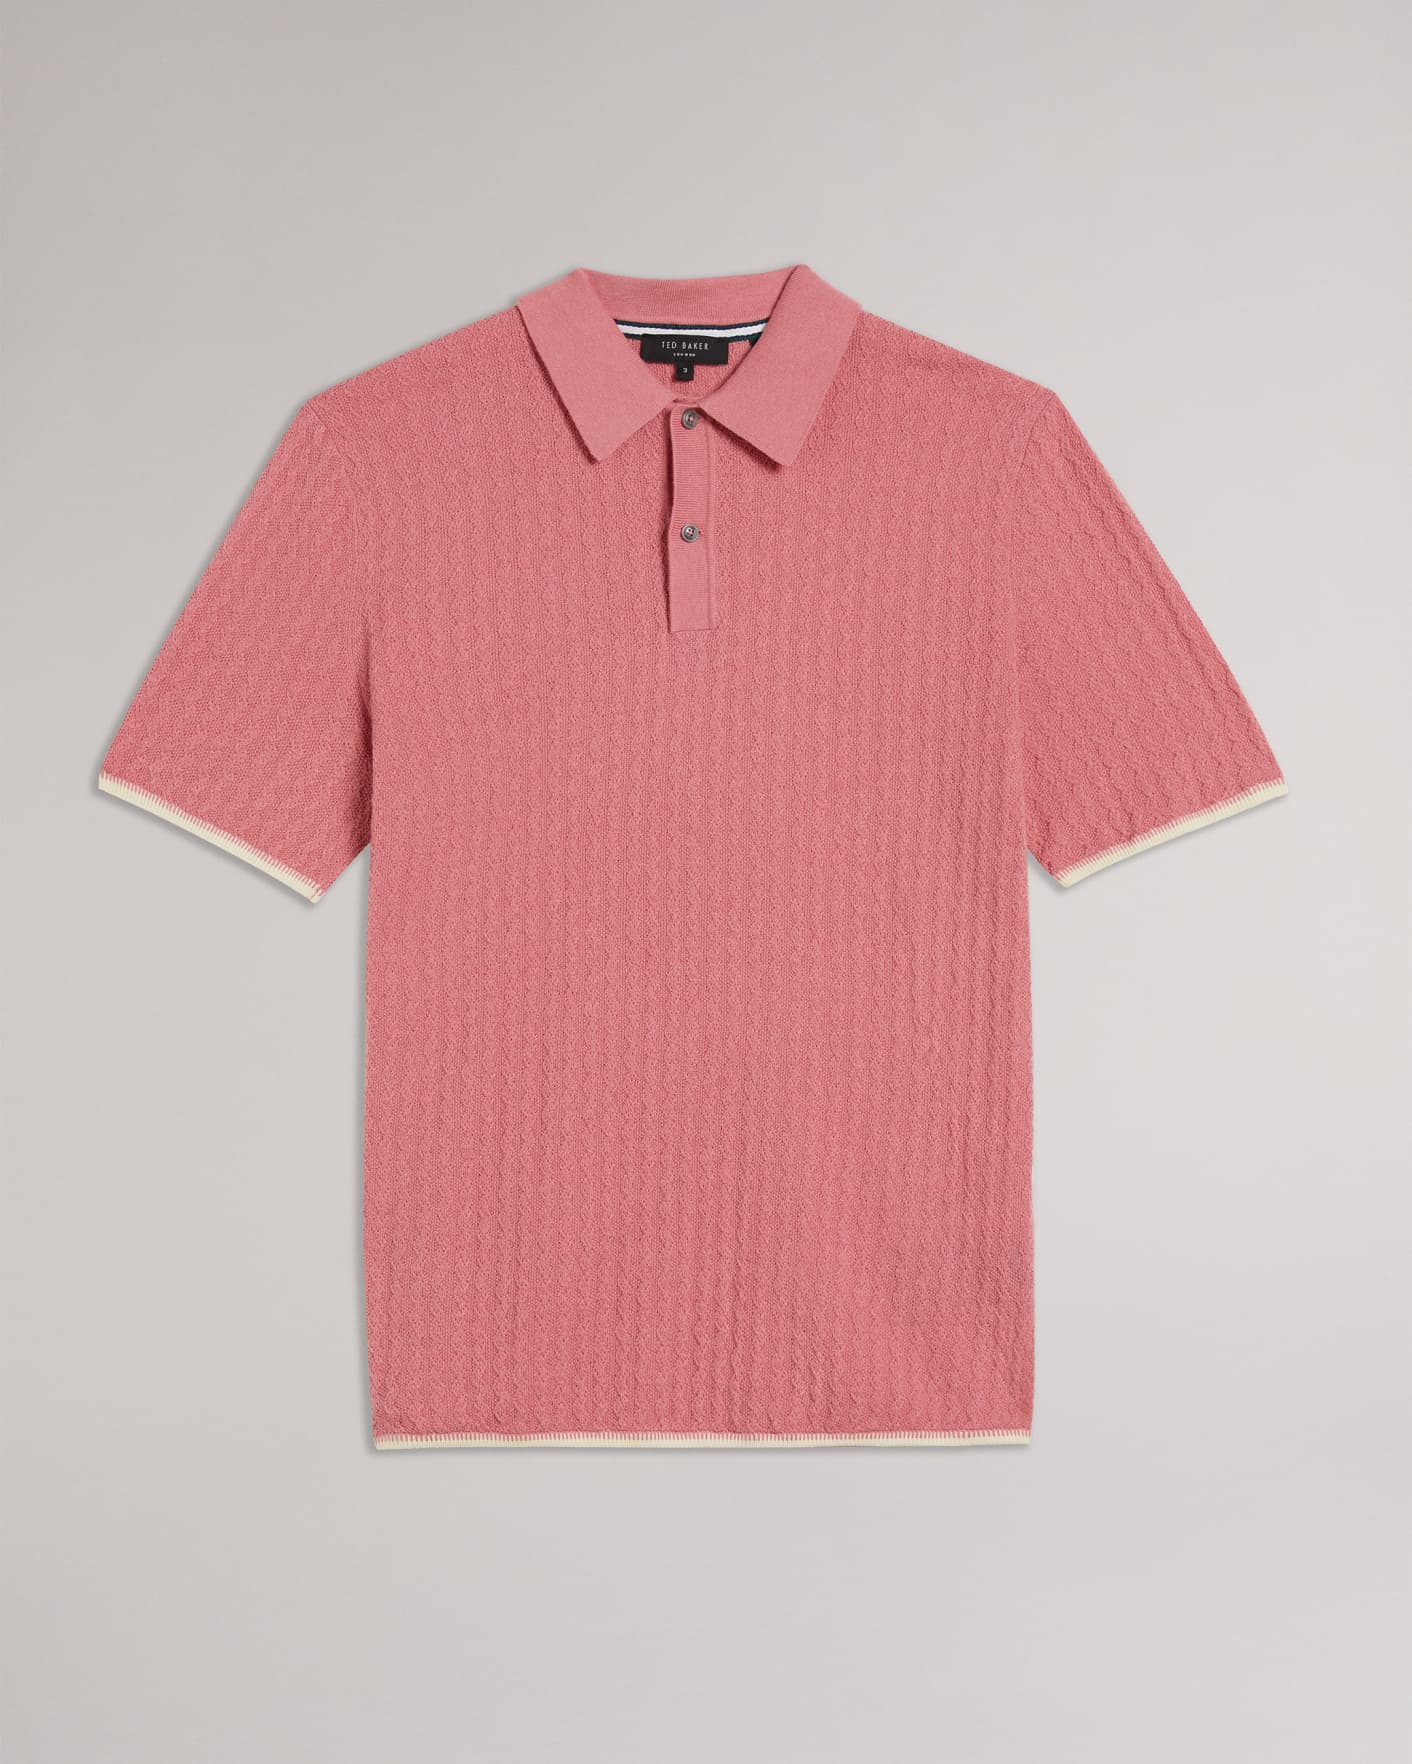 MID-PINK Knitted Textured Stitch Polo Ted Baker